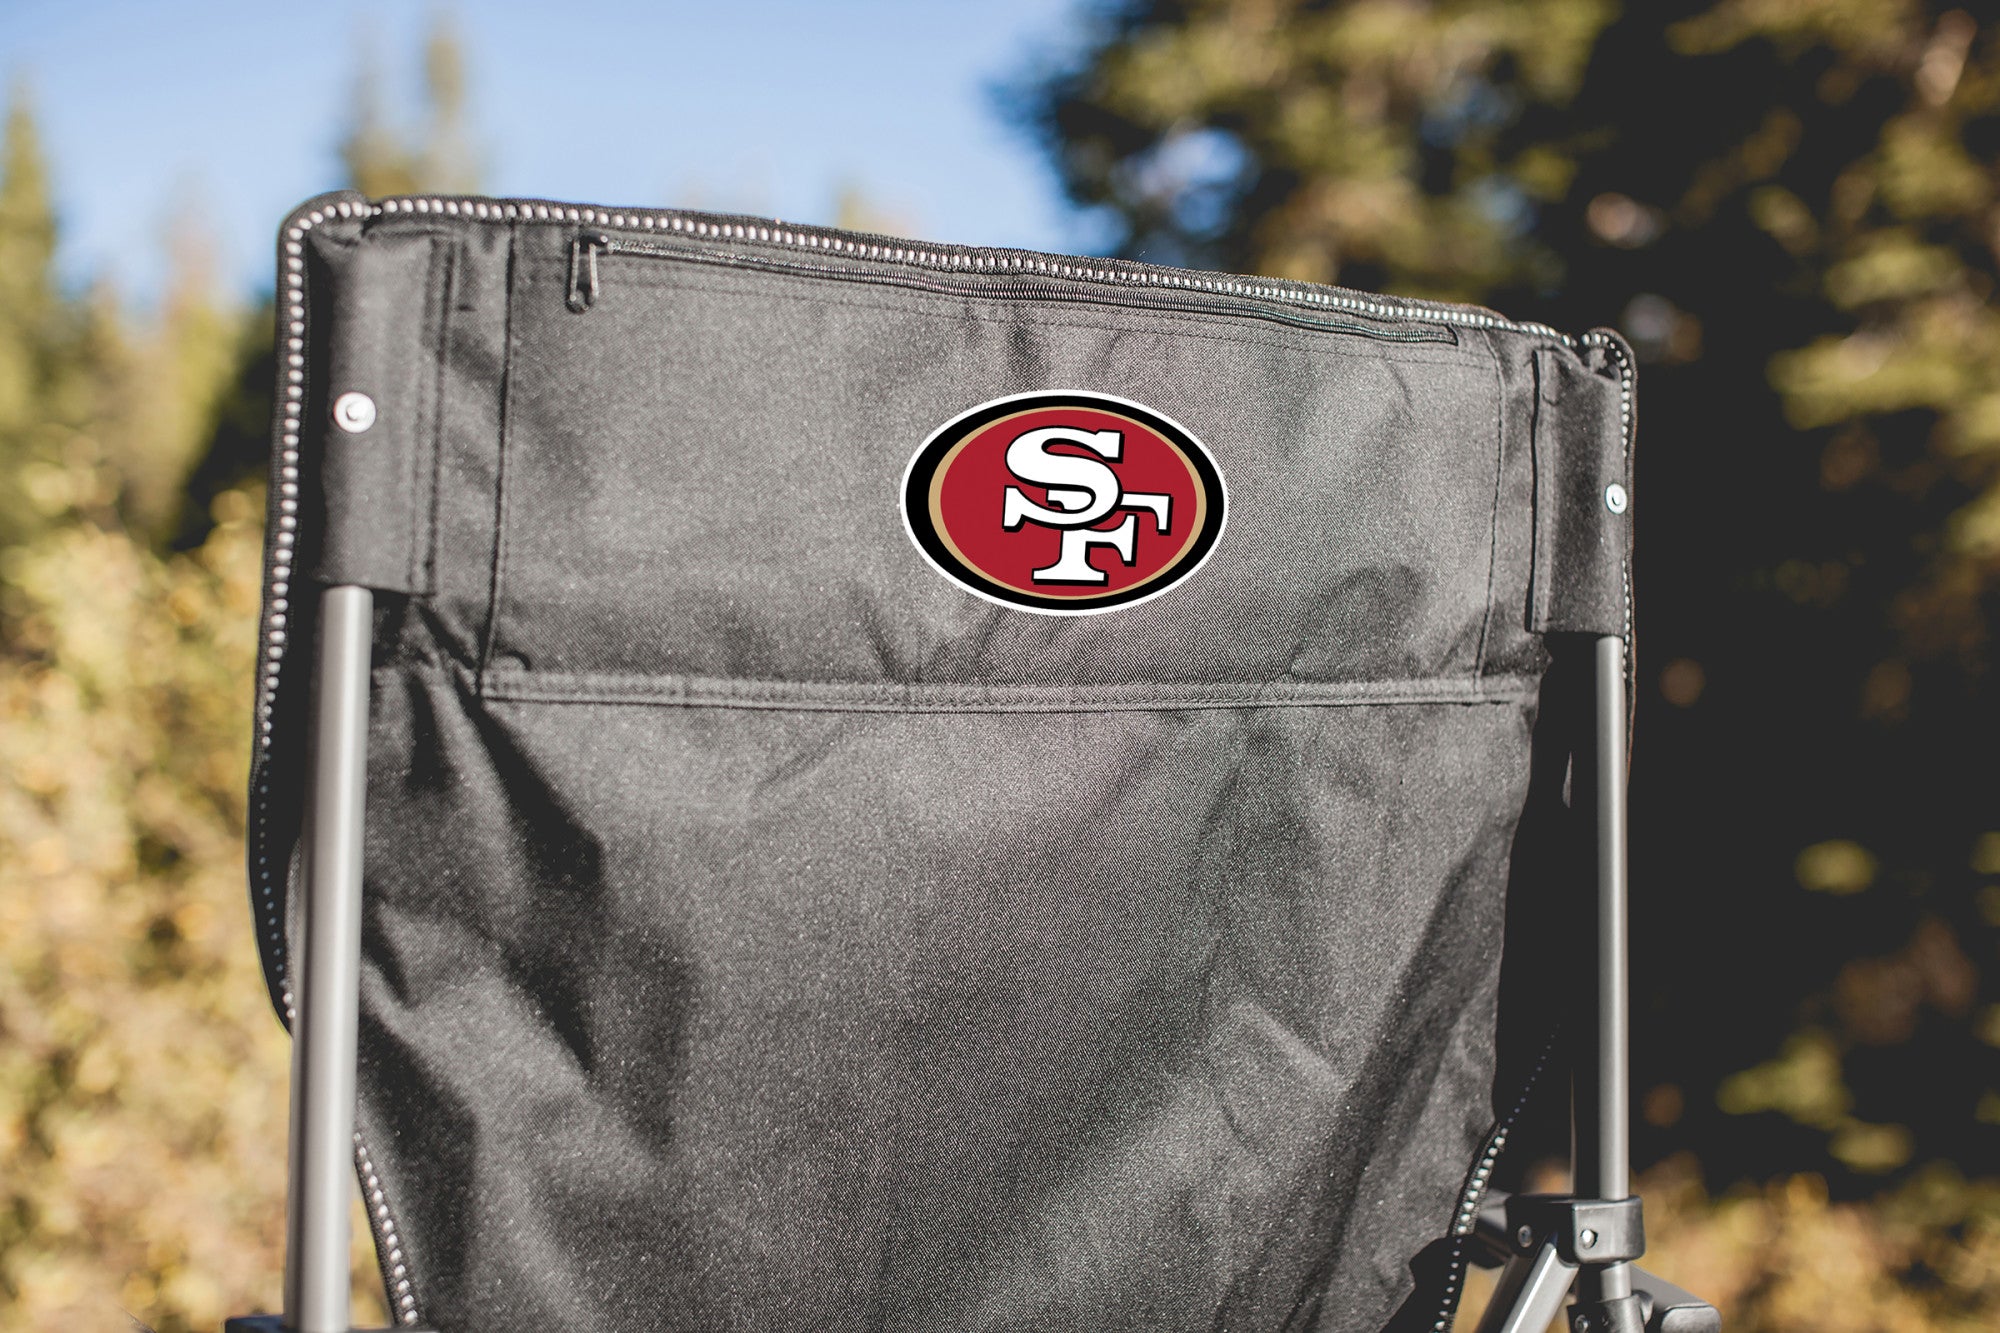 San Francisco 49ers - Big Bear XXL Camping Chair with Cooler